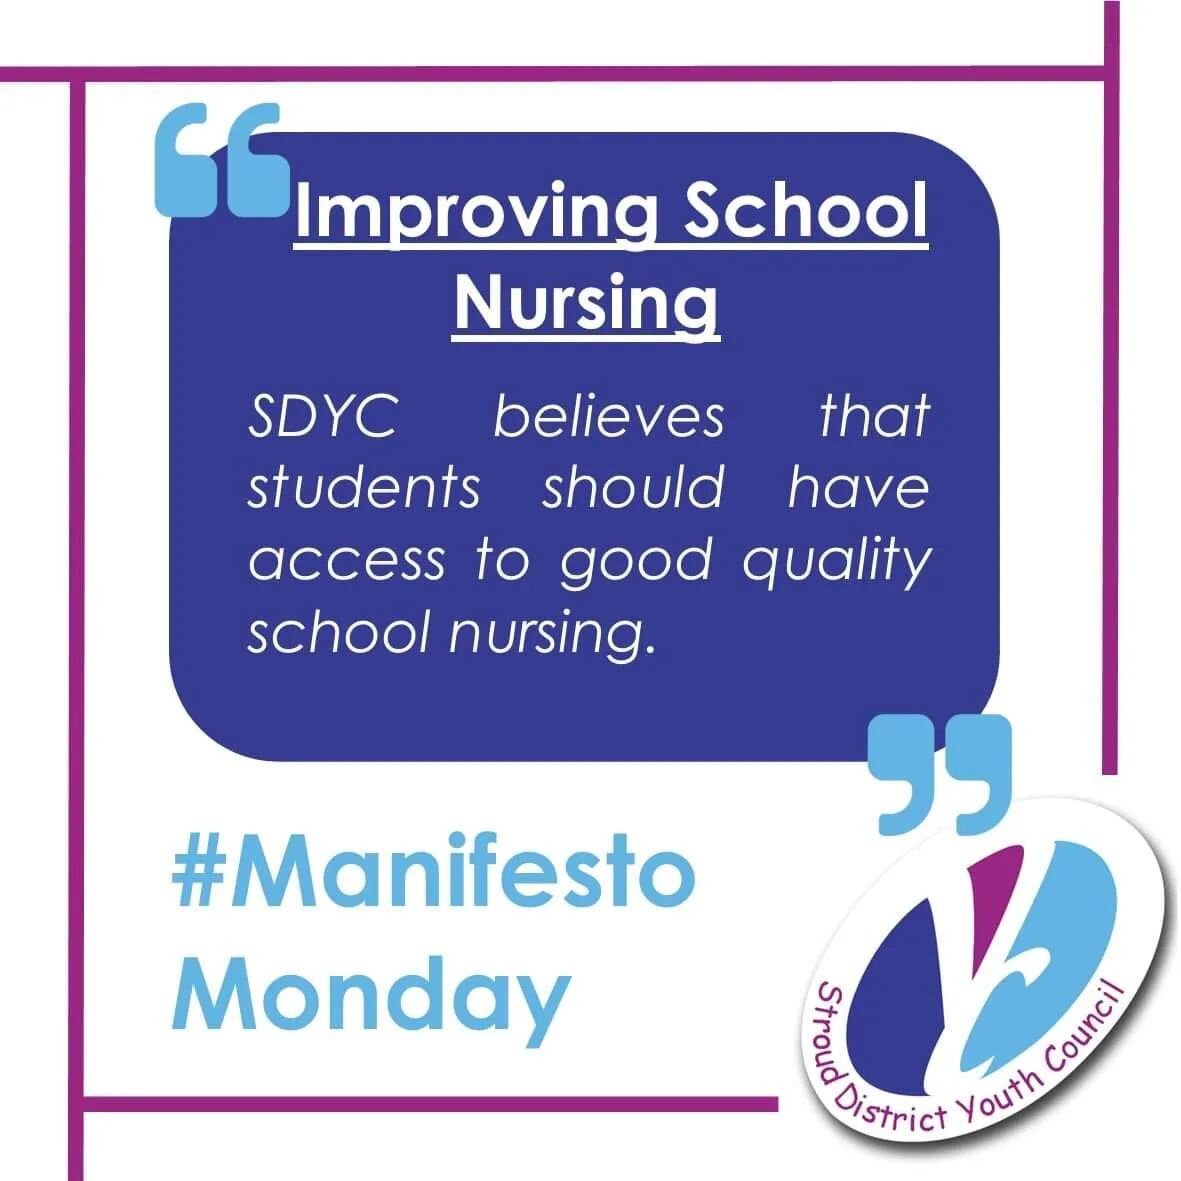 Our social media campaign series continues 😄: 

The #ManifestoMonday initiative will see us sharing one of SDYC's Manifesto statements each week - the series will reflect the diversity of SDYC's work &amp; the range of issues affecting young people.